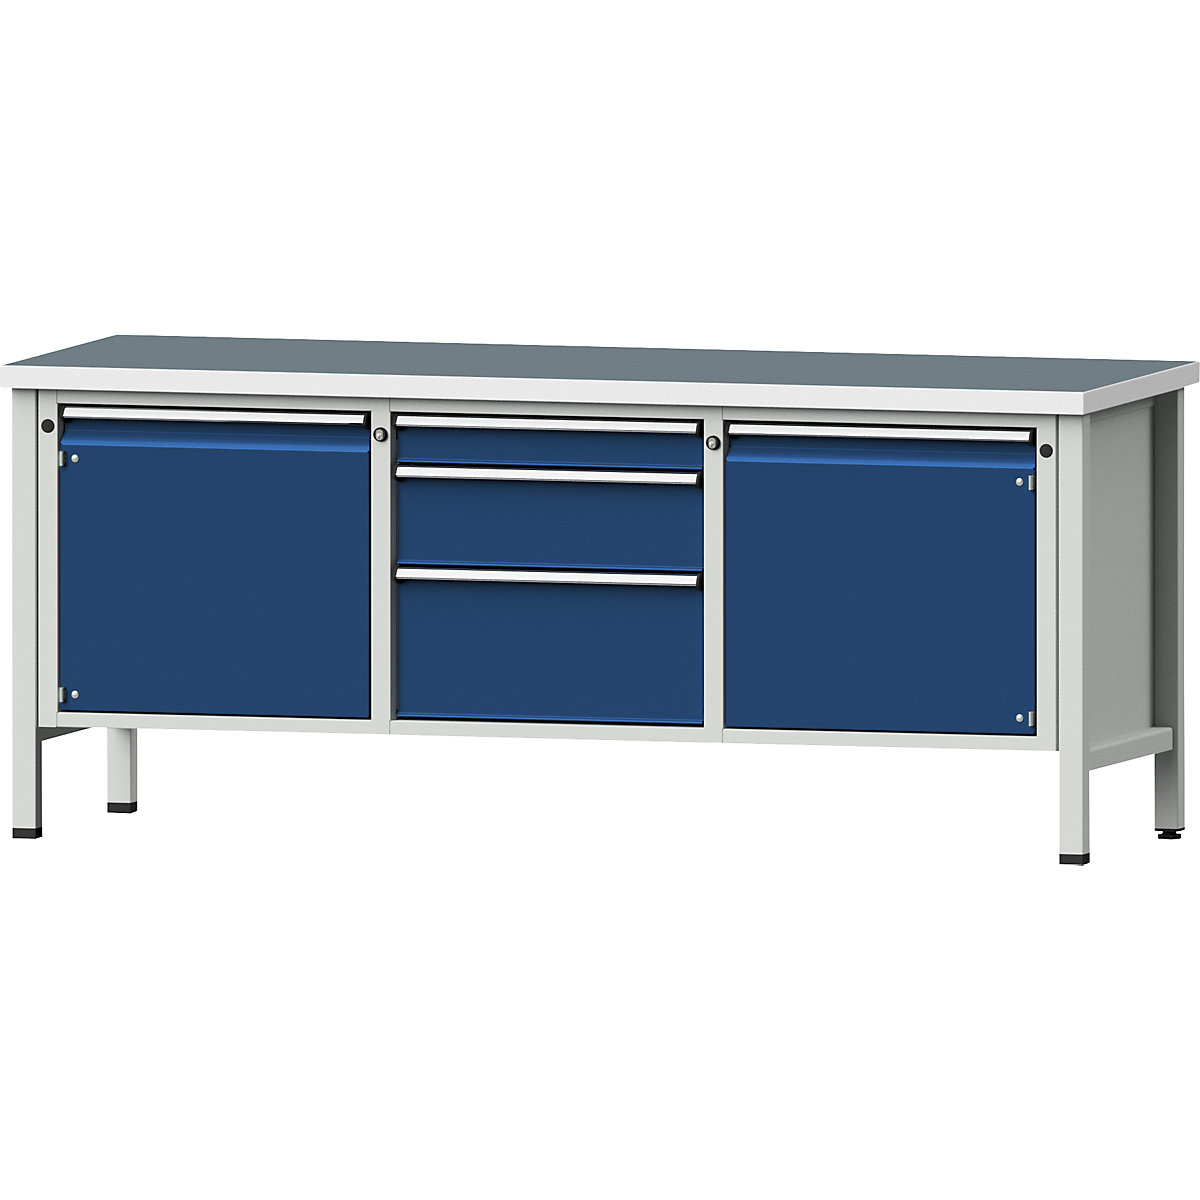 Workbench, frame construction – ANKE, 2 doors 540 mm, 3 drawers, universal worktop, partial extension-11